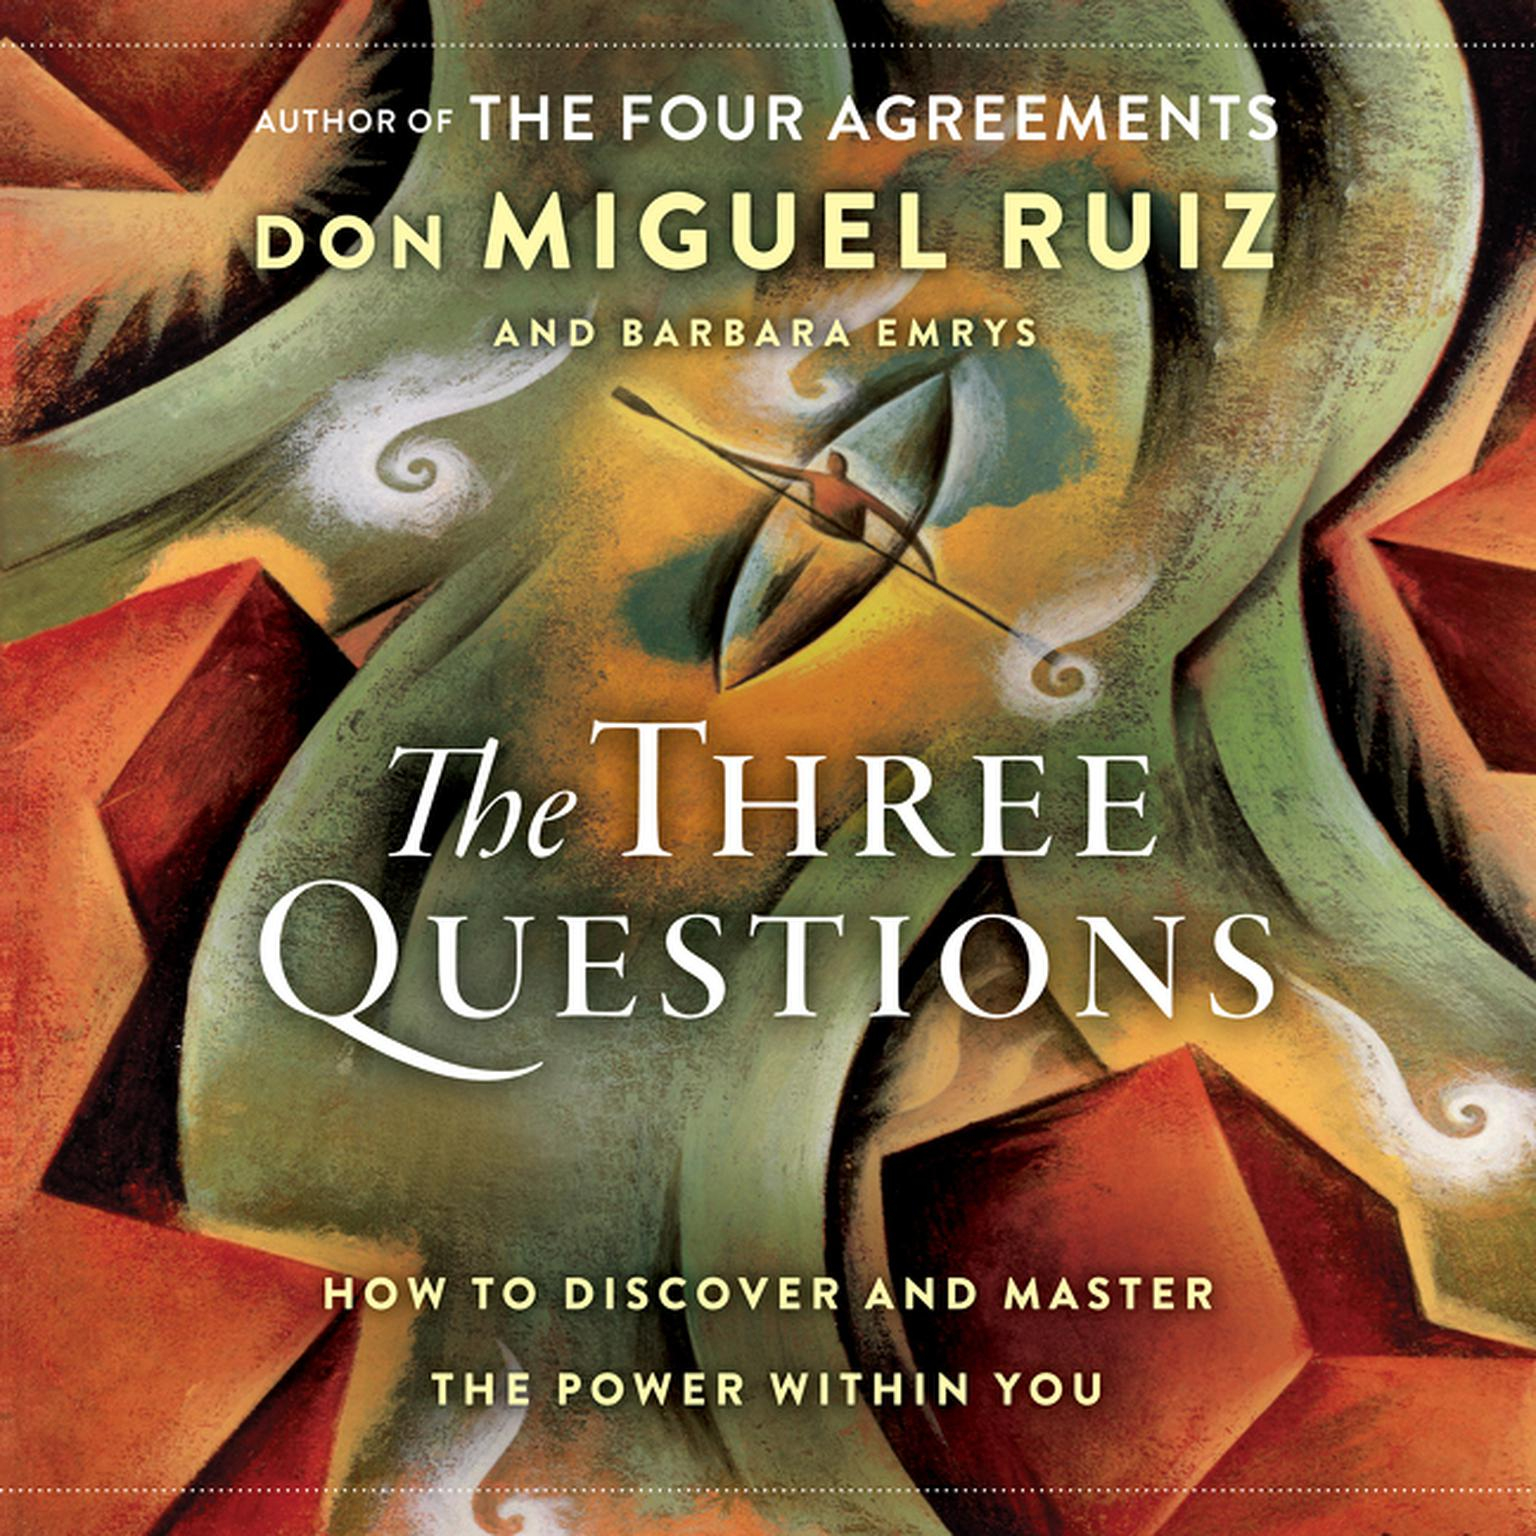 Four Agreements Book Free Download The Three Questions How To Discover And Master The Power Within You Audiobook